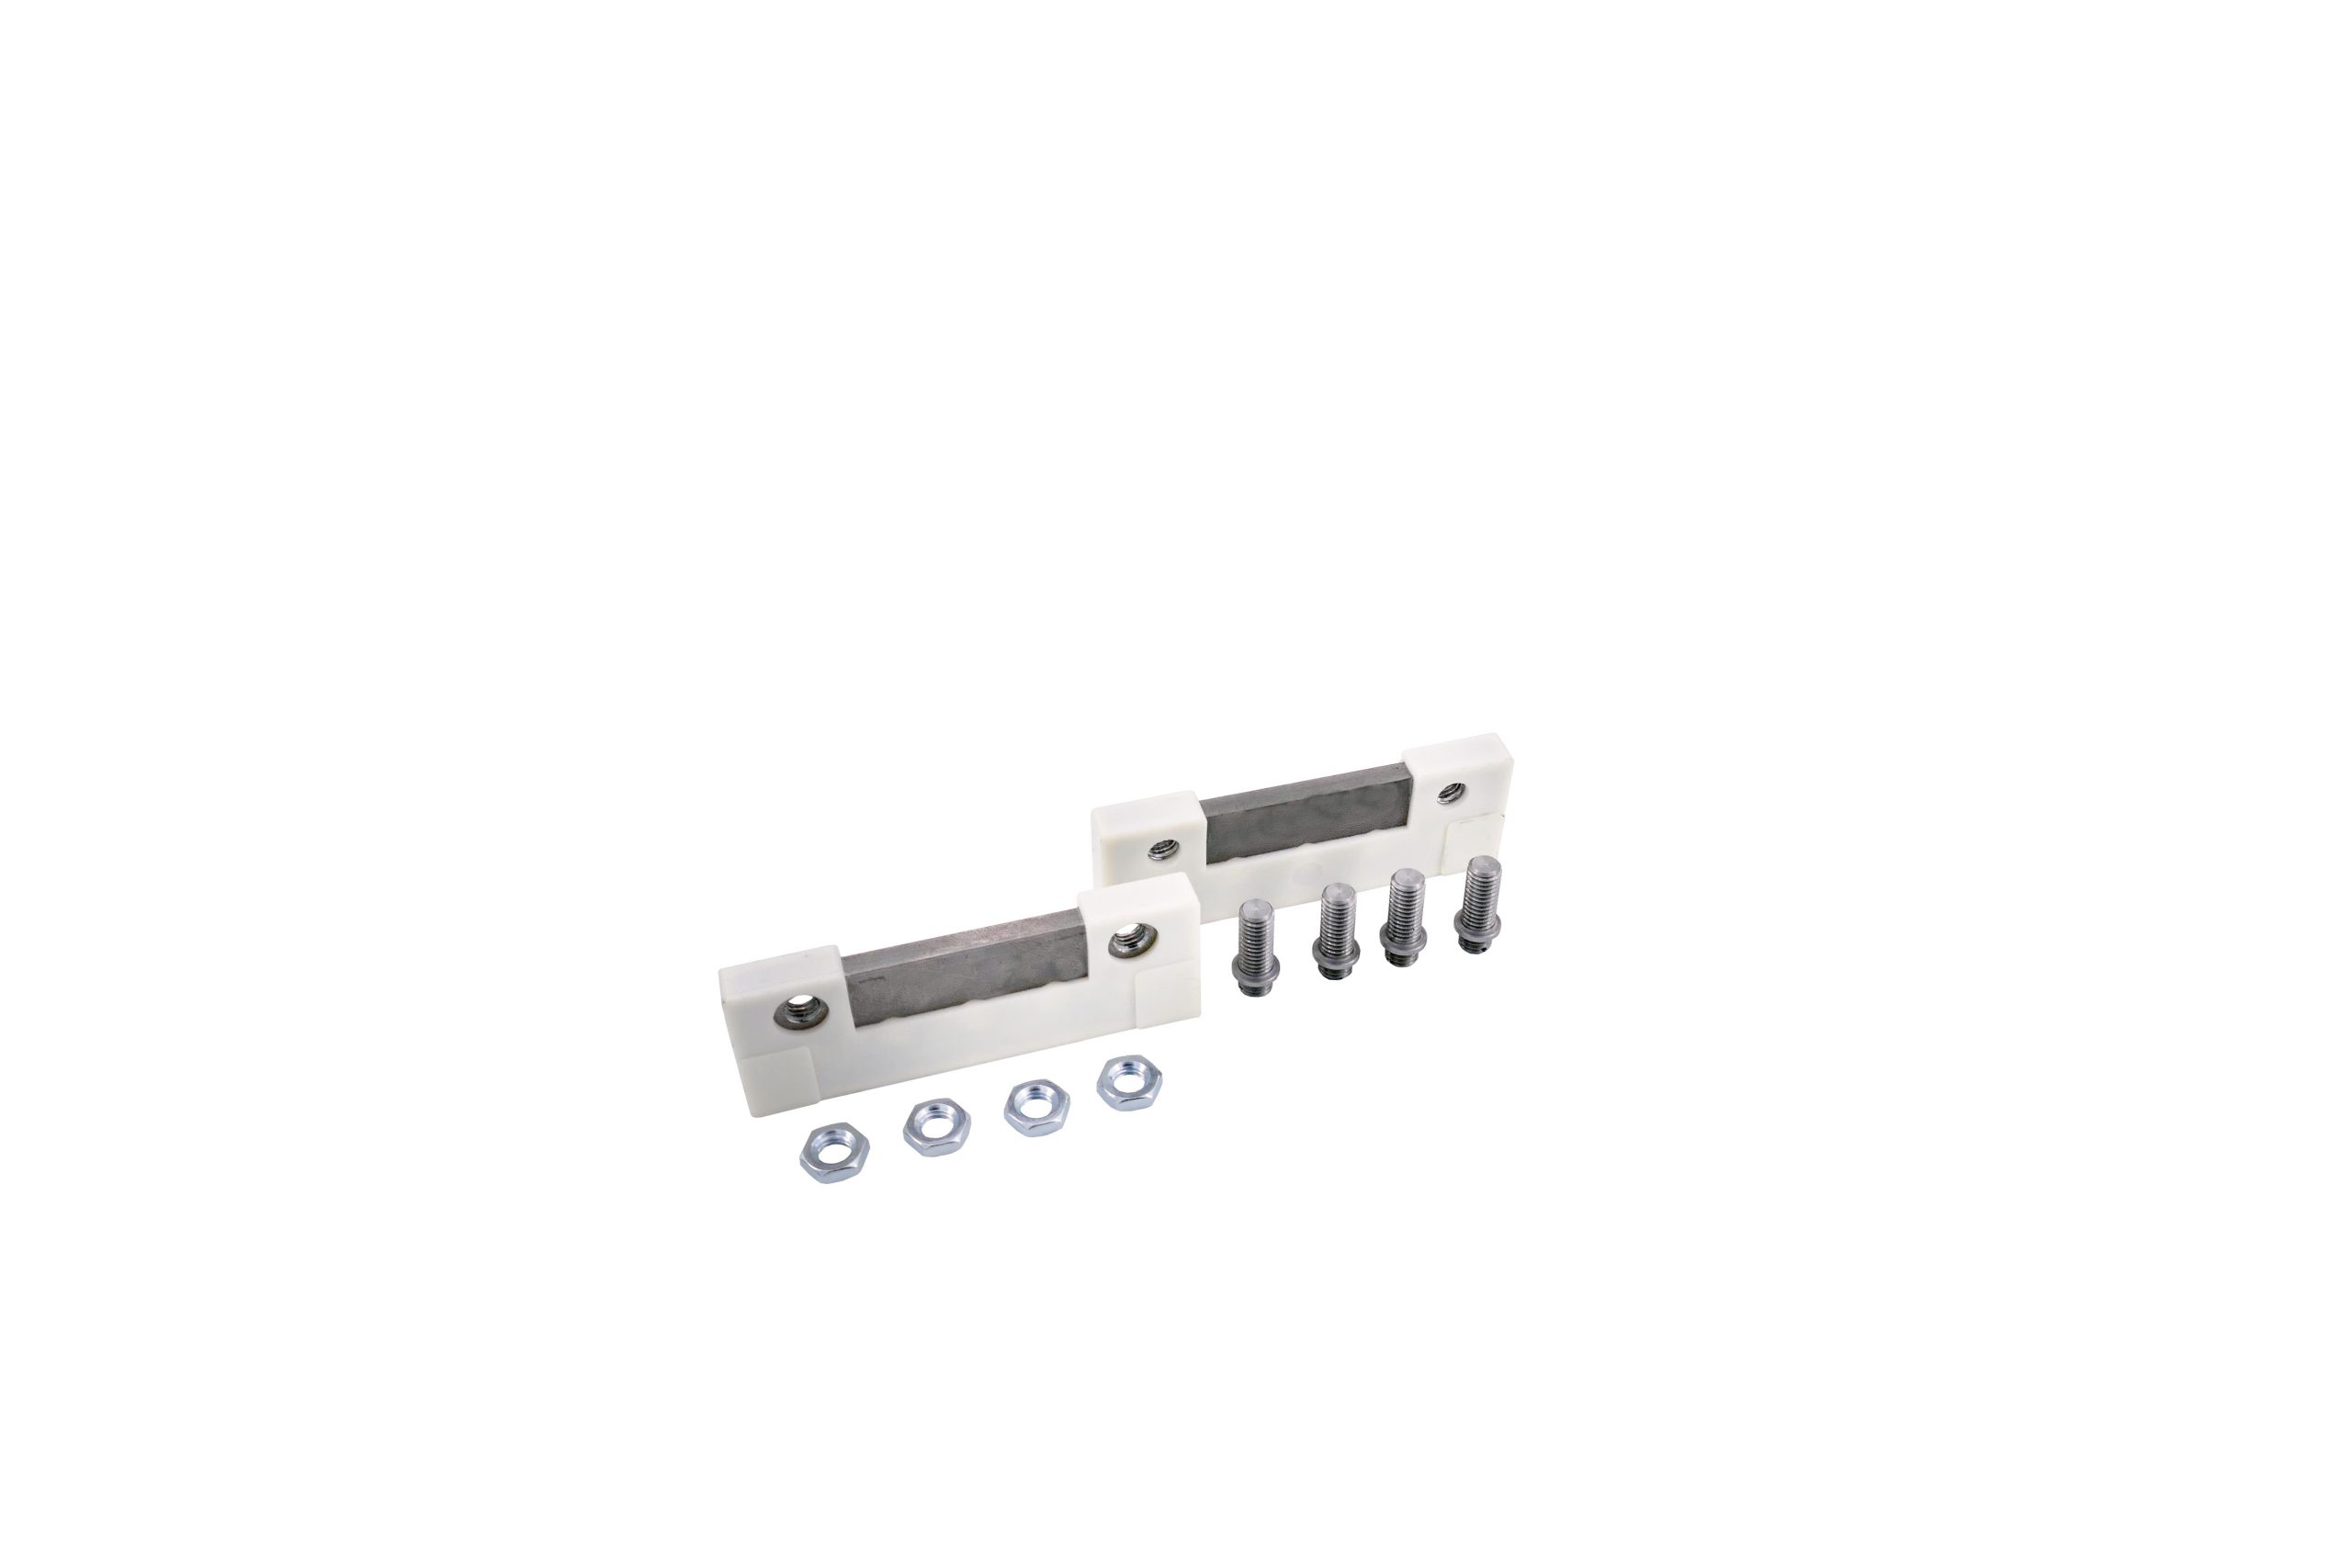 Here you can see a package unit for sliding door guides